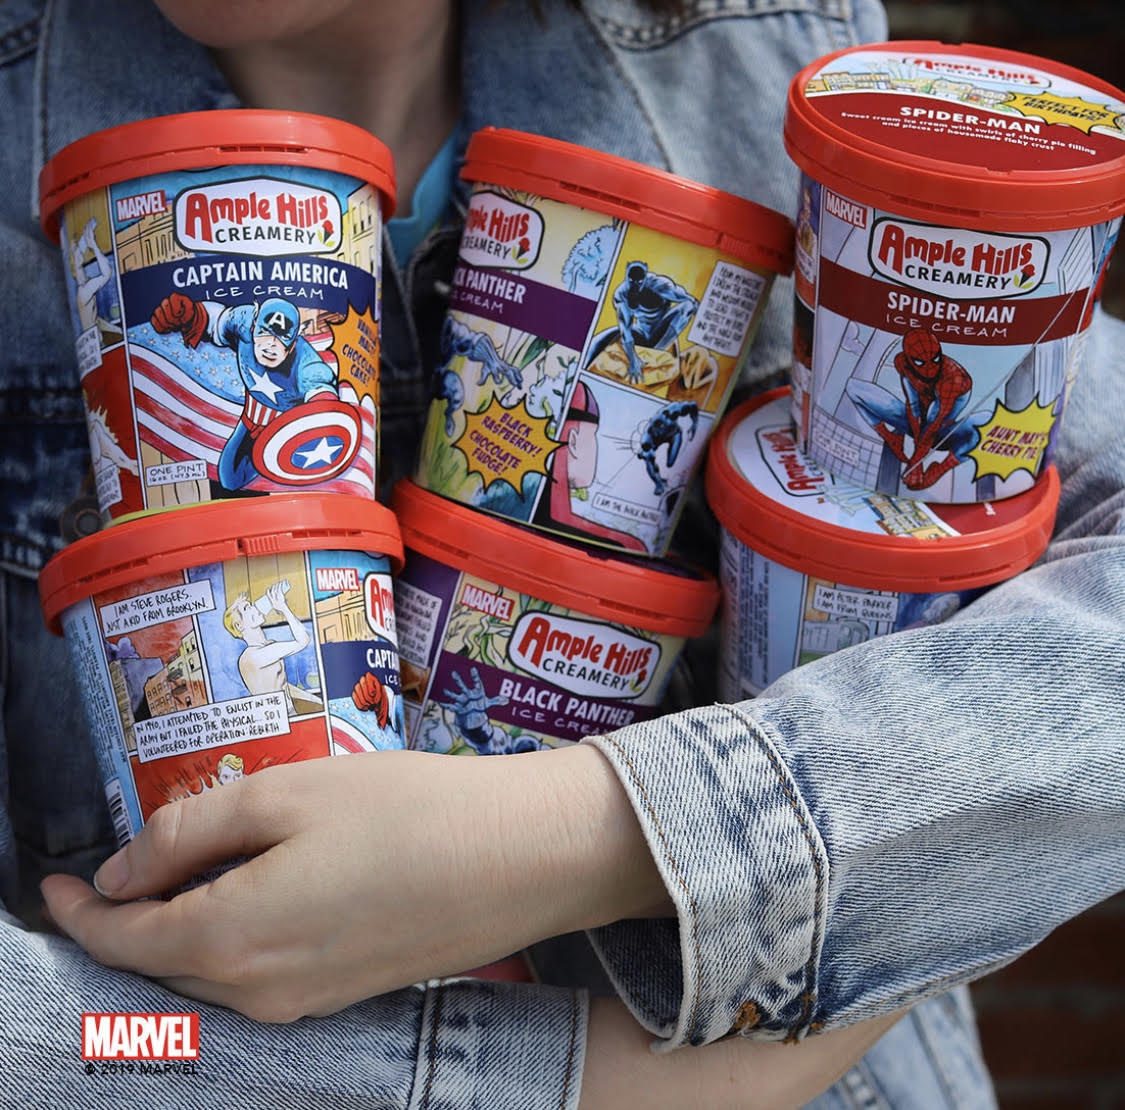 Ample Hills and Marvel Team Up for New Ice Cream Flavors